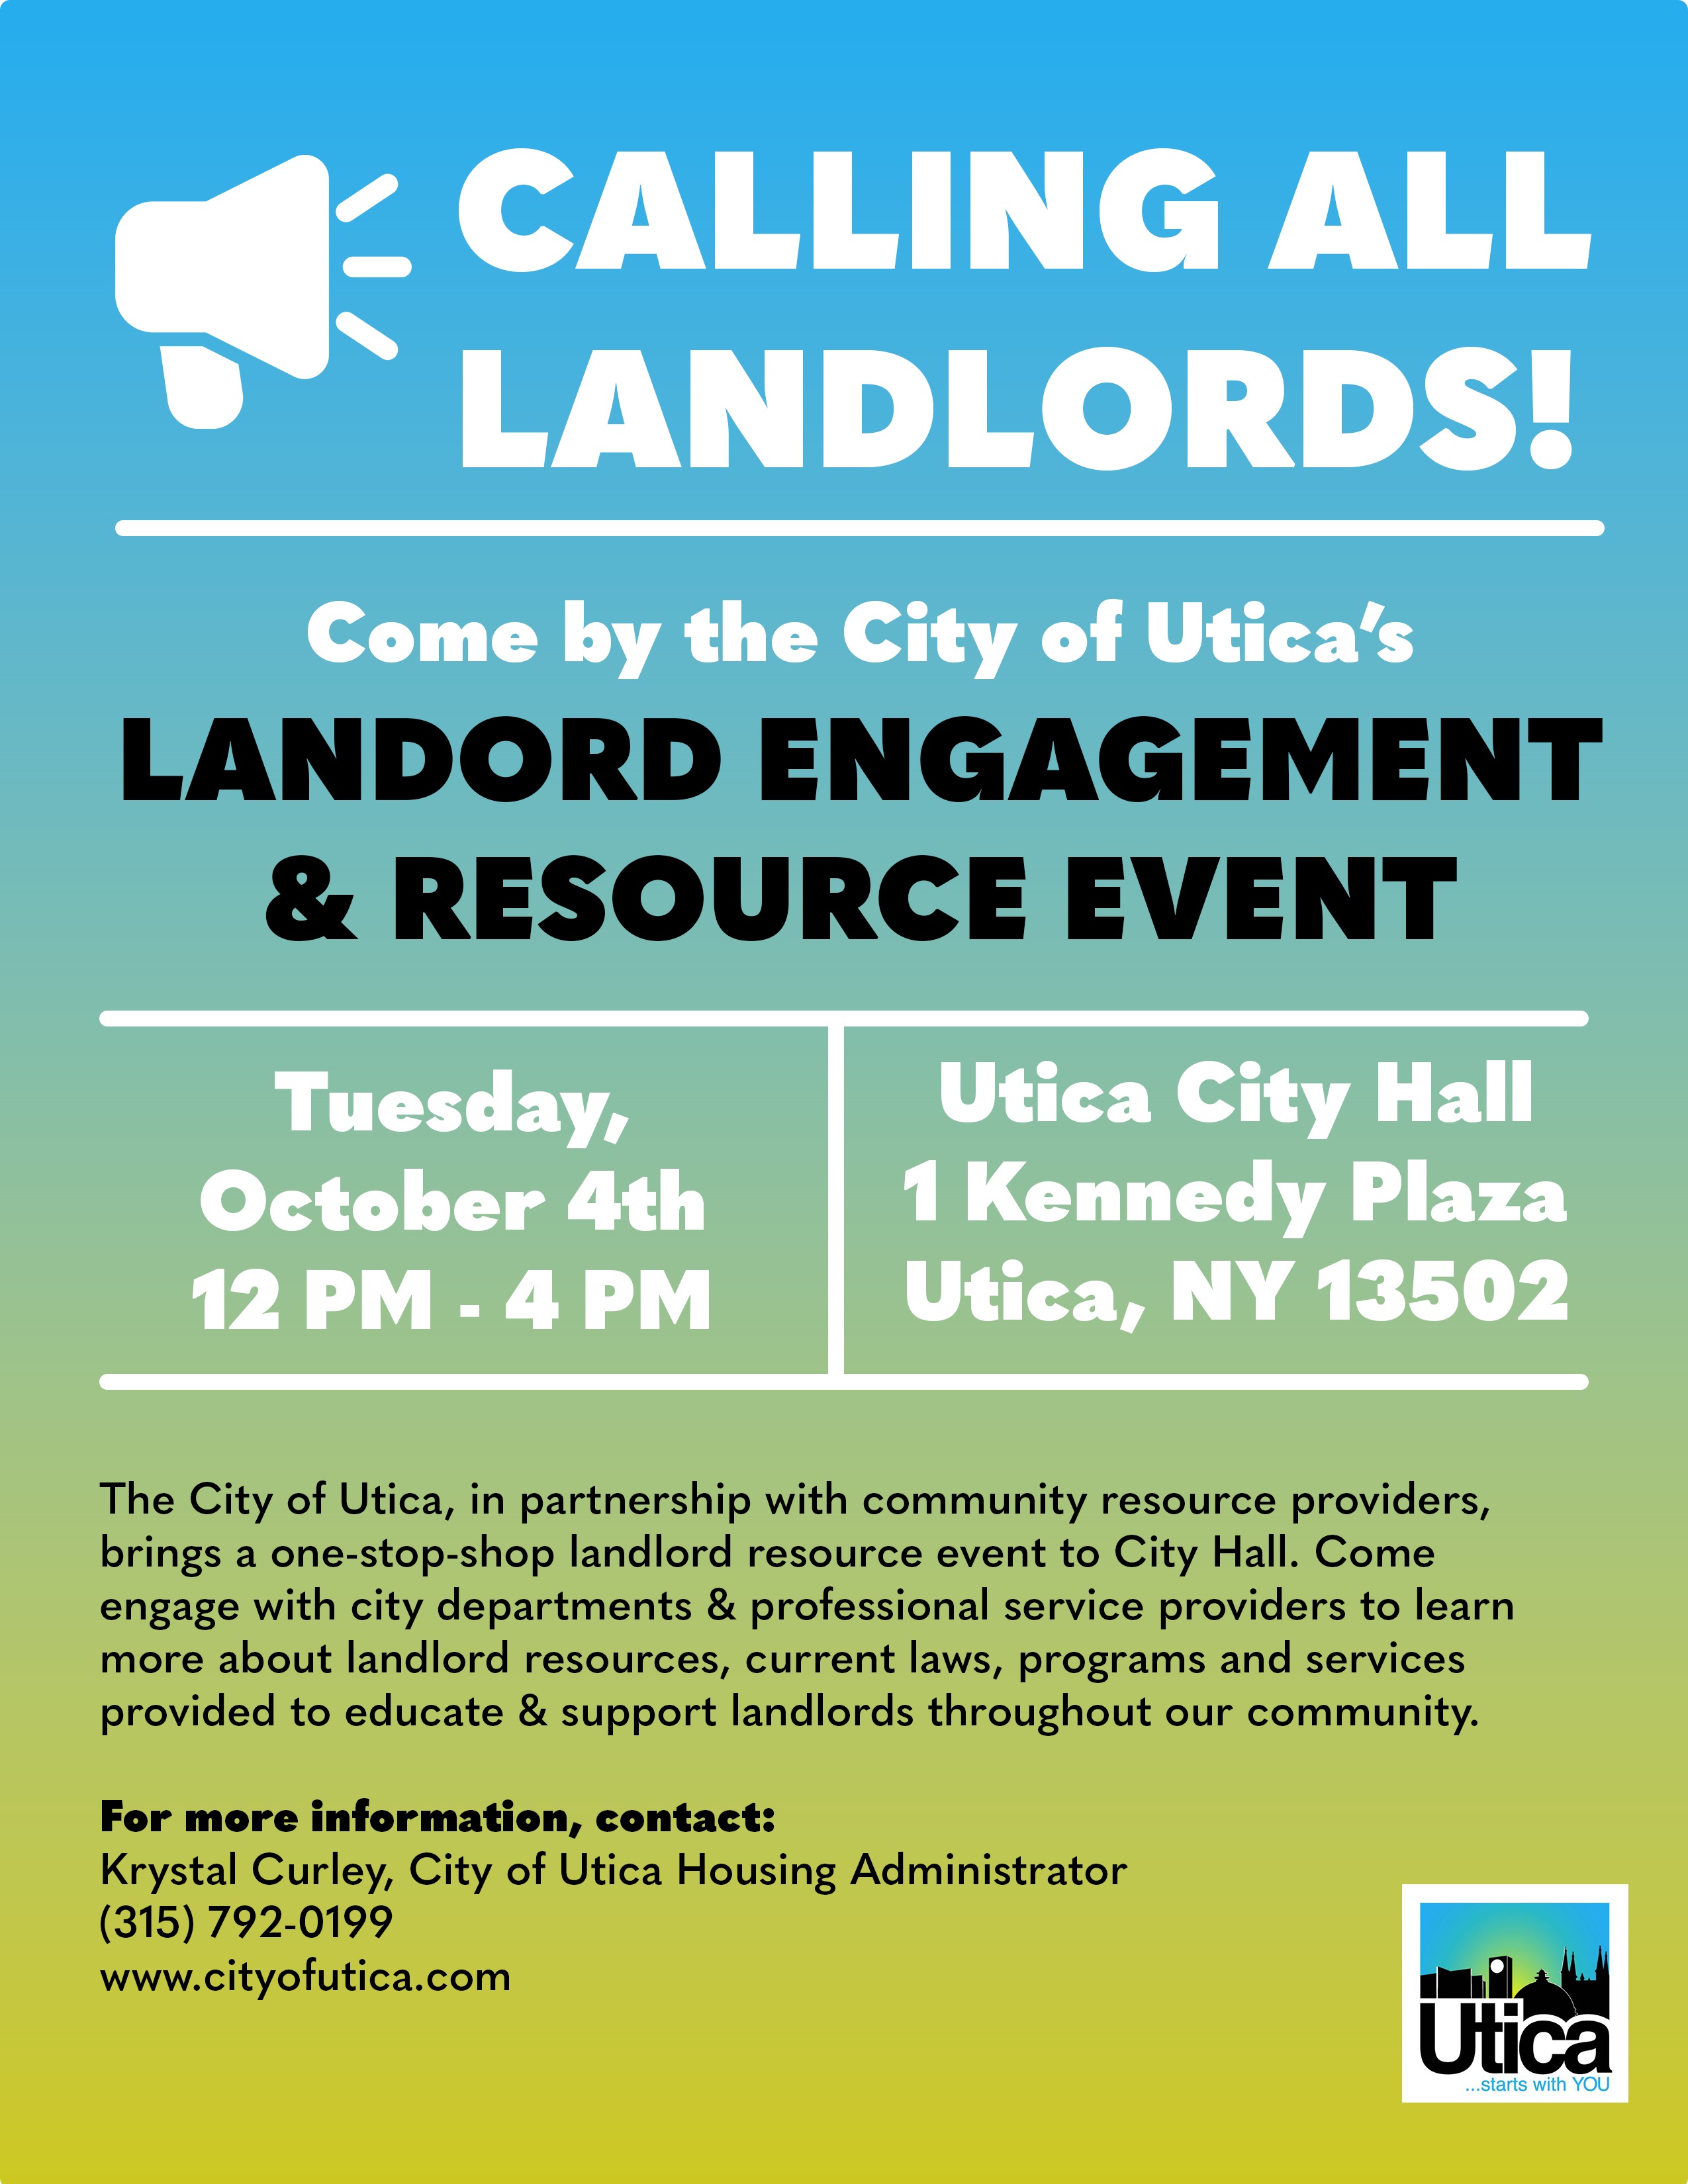 Tuesday, October 4th, 12-4PM at Utica City Hall